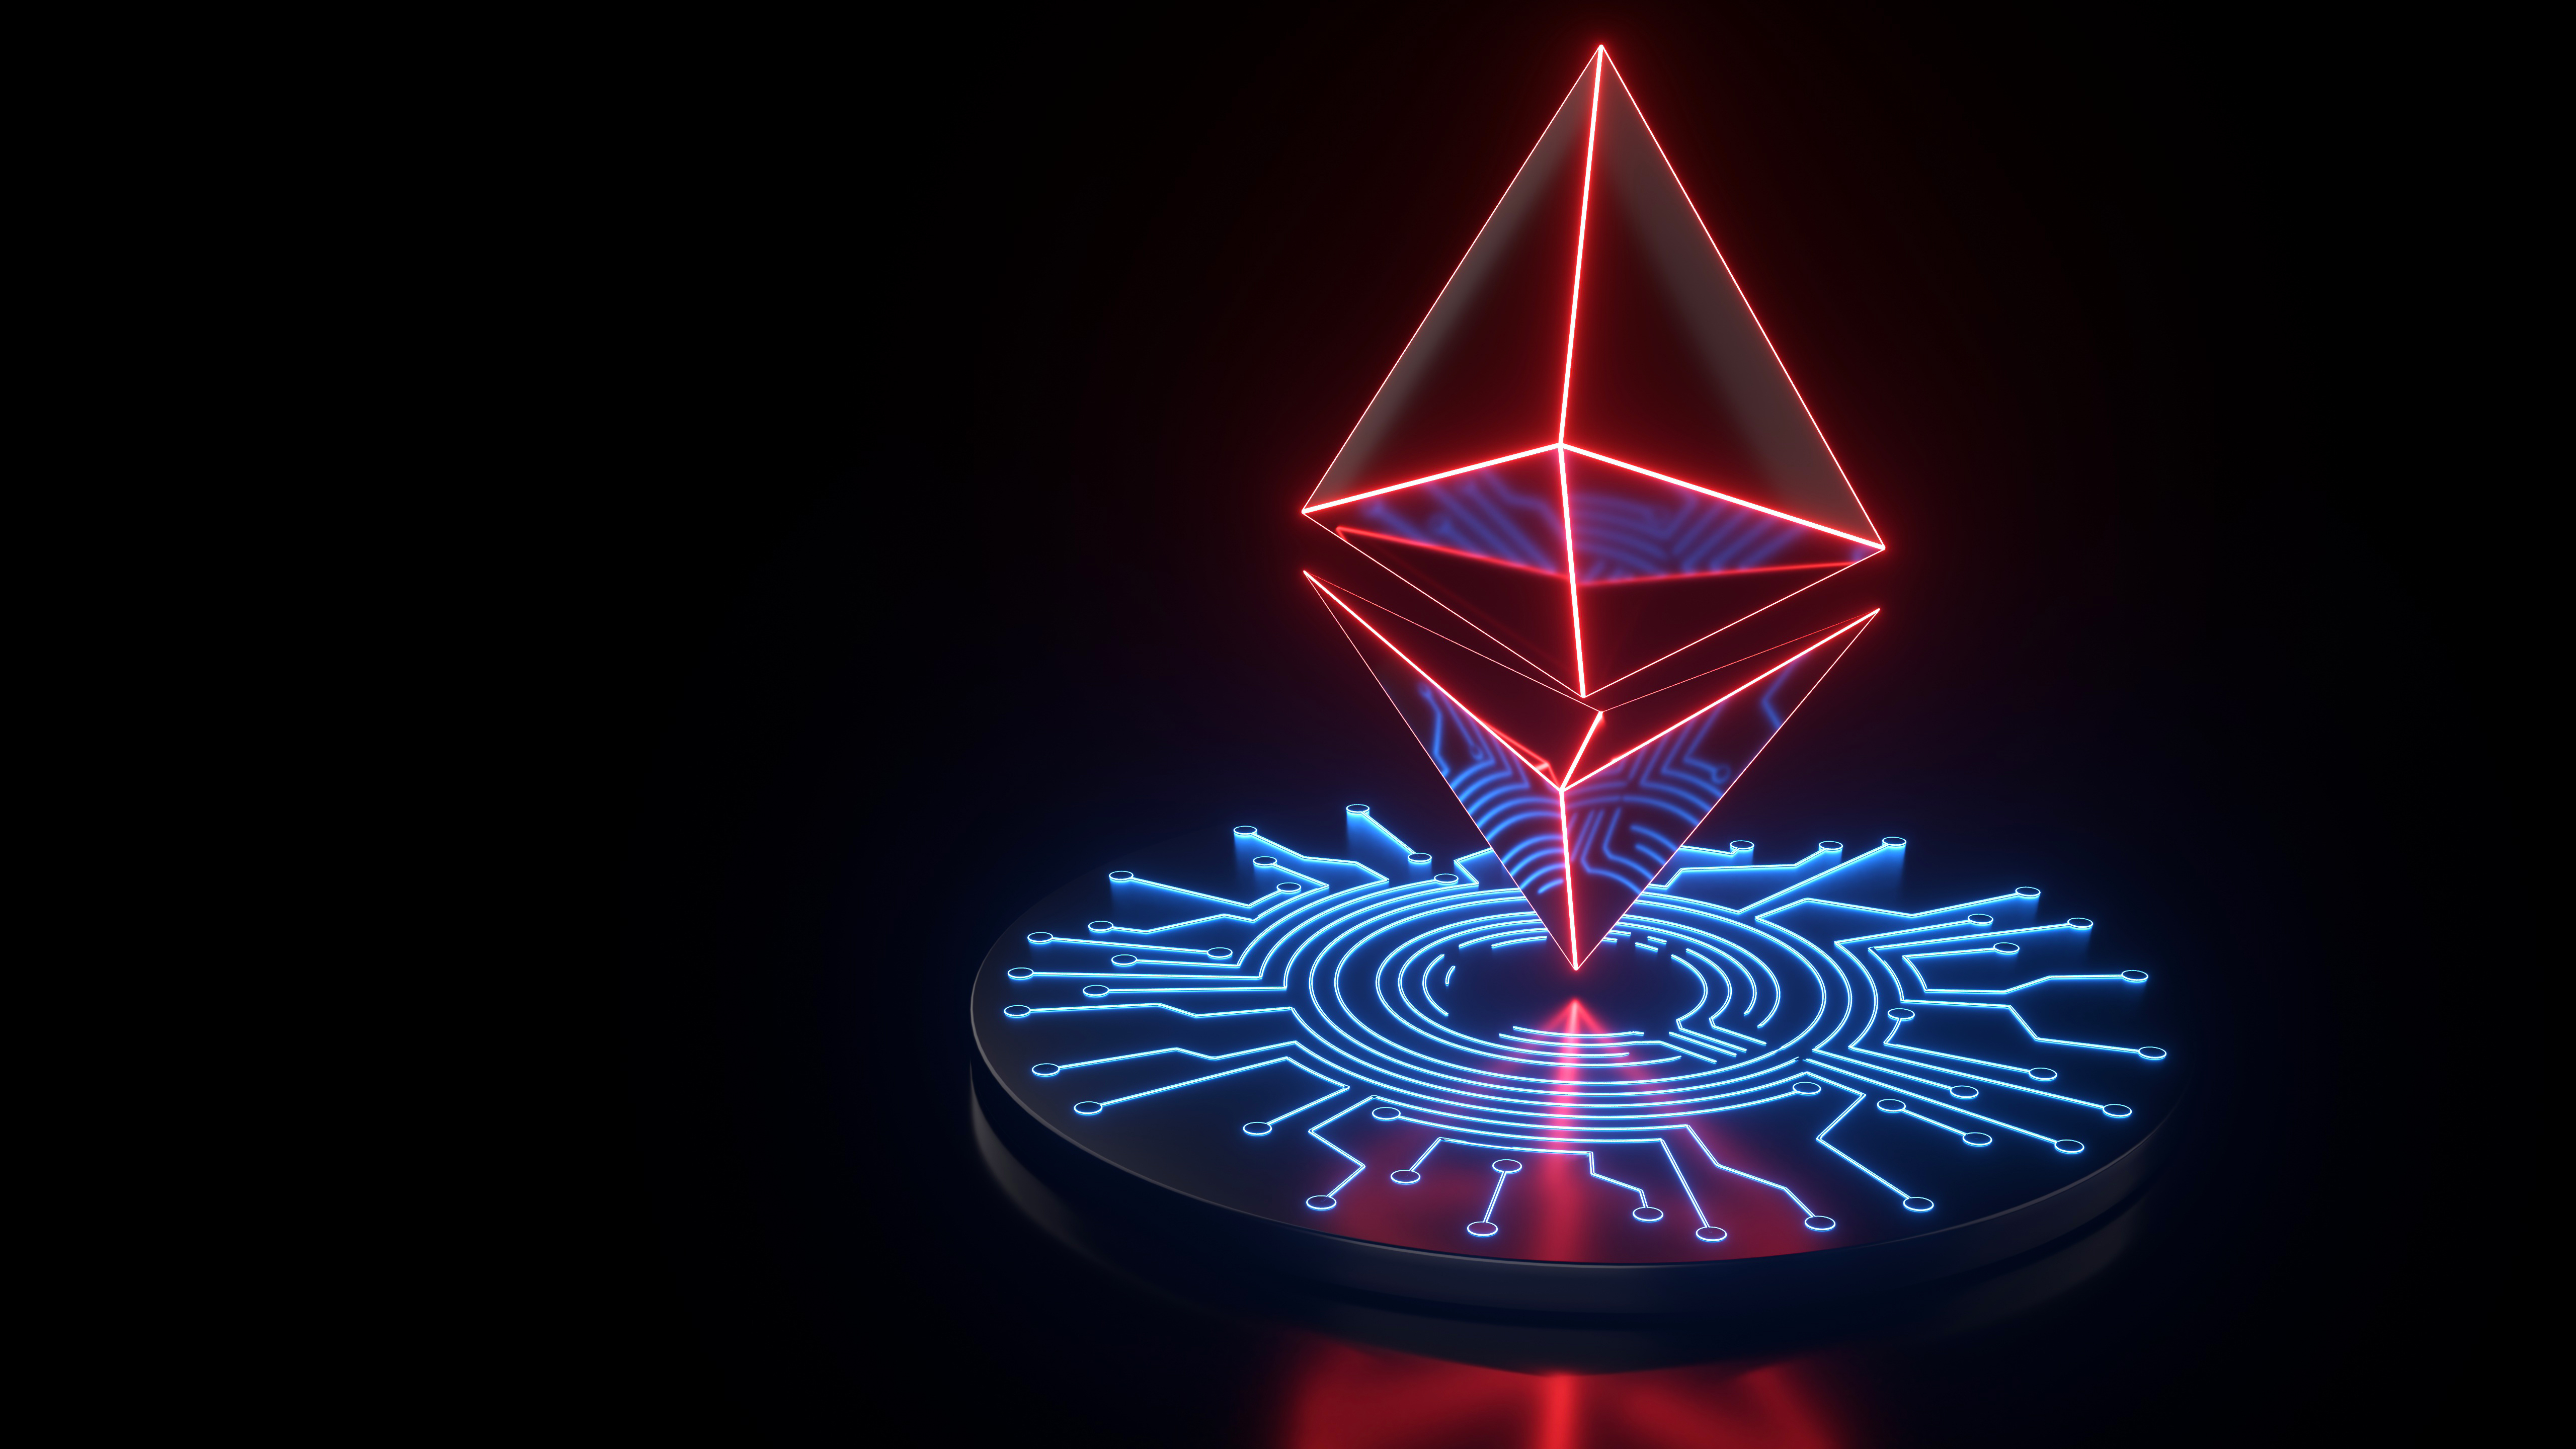 Is This Ethereum ICO Project To Blame For ETH’s Price Slump?